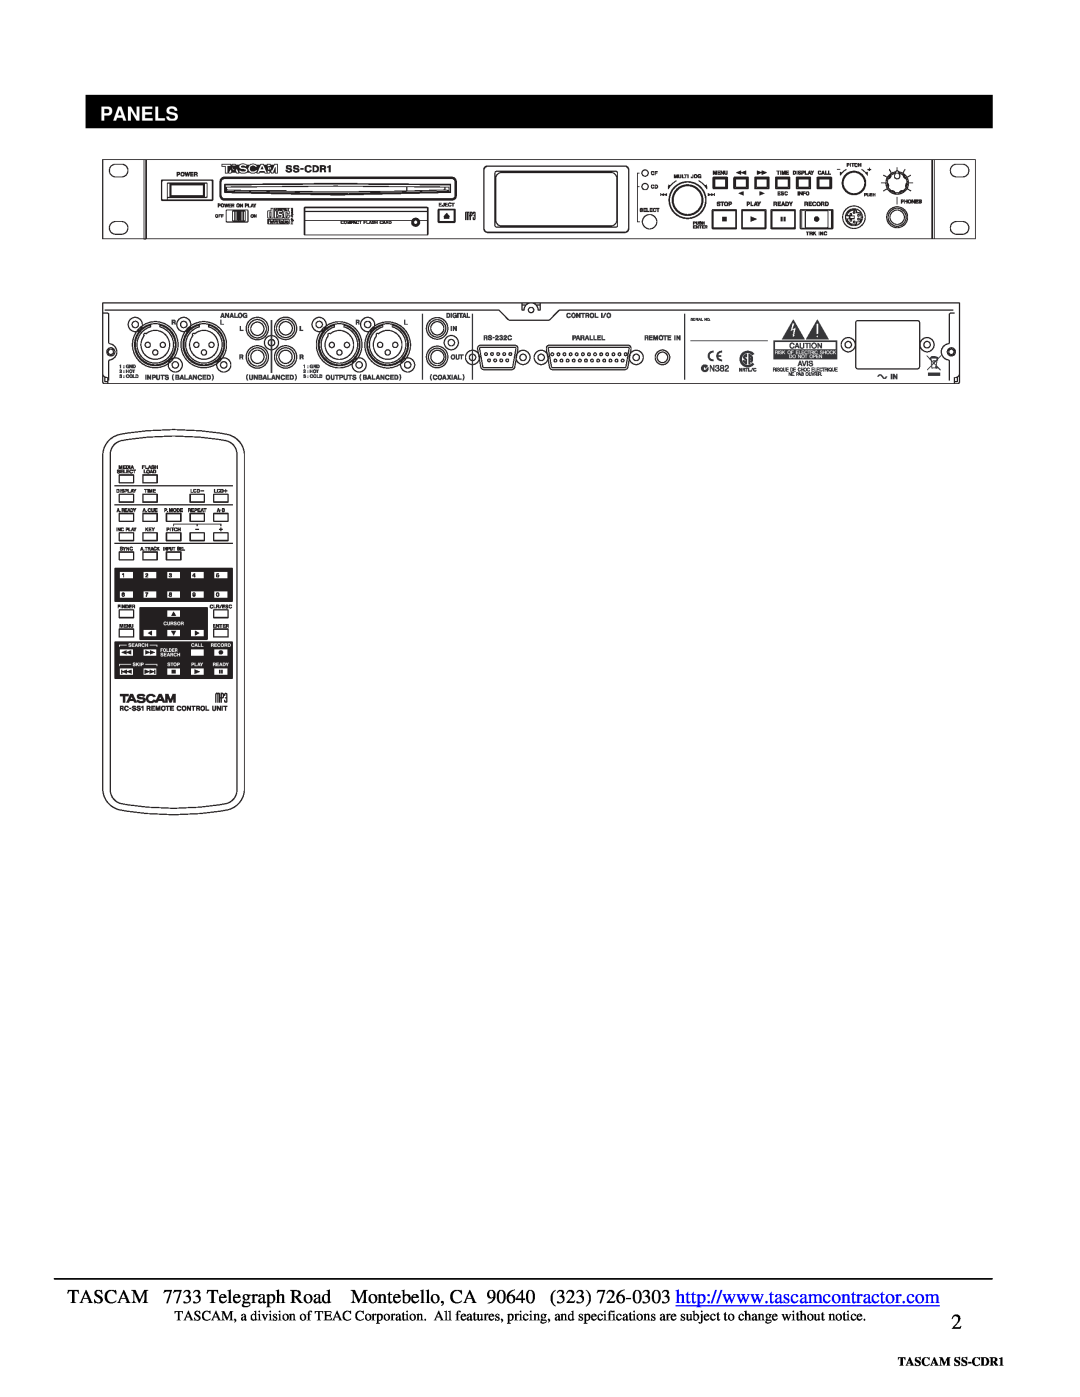 Tascam specifications Panels, TASCAM SS-CDR1 